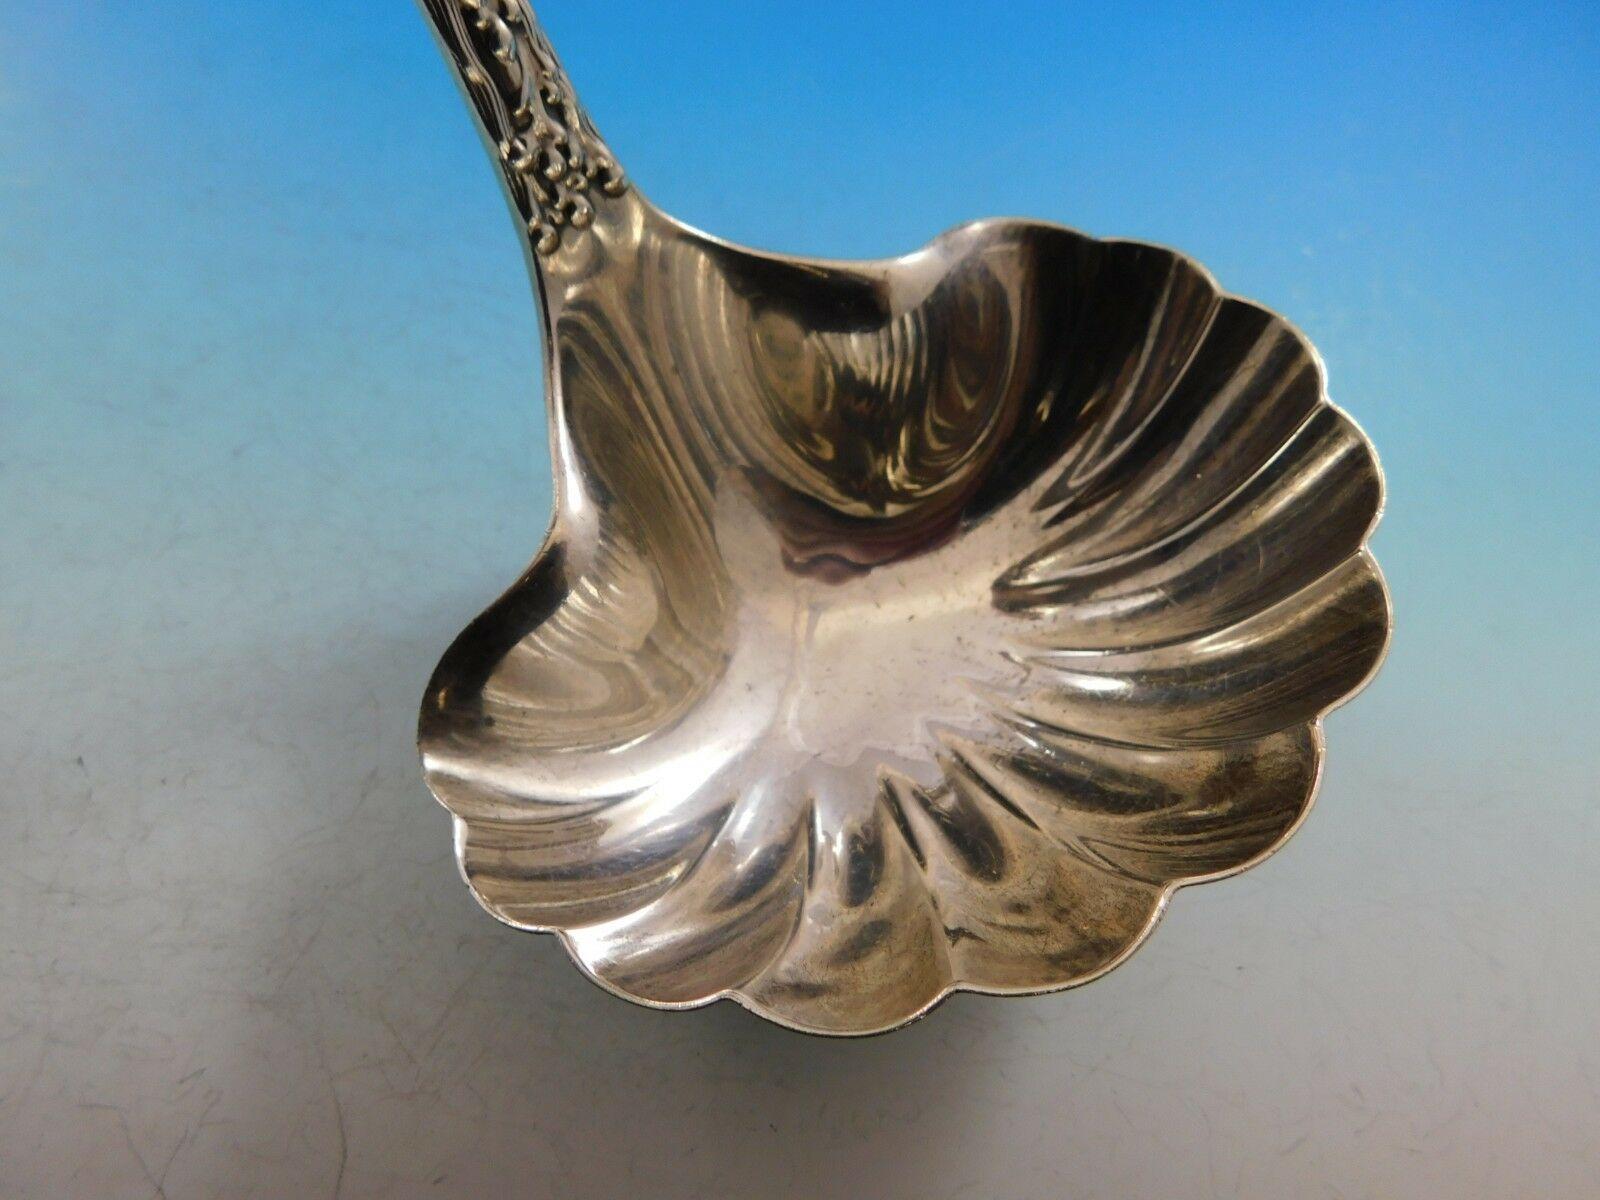 Stunning sterling silver soup ladle measuring 11 1/2